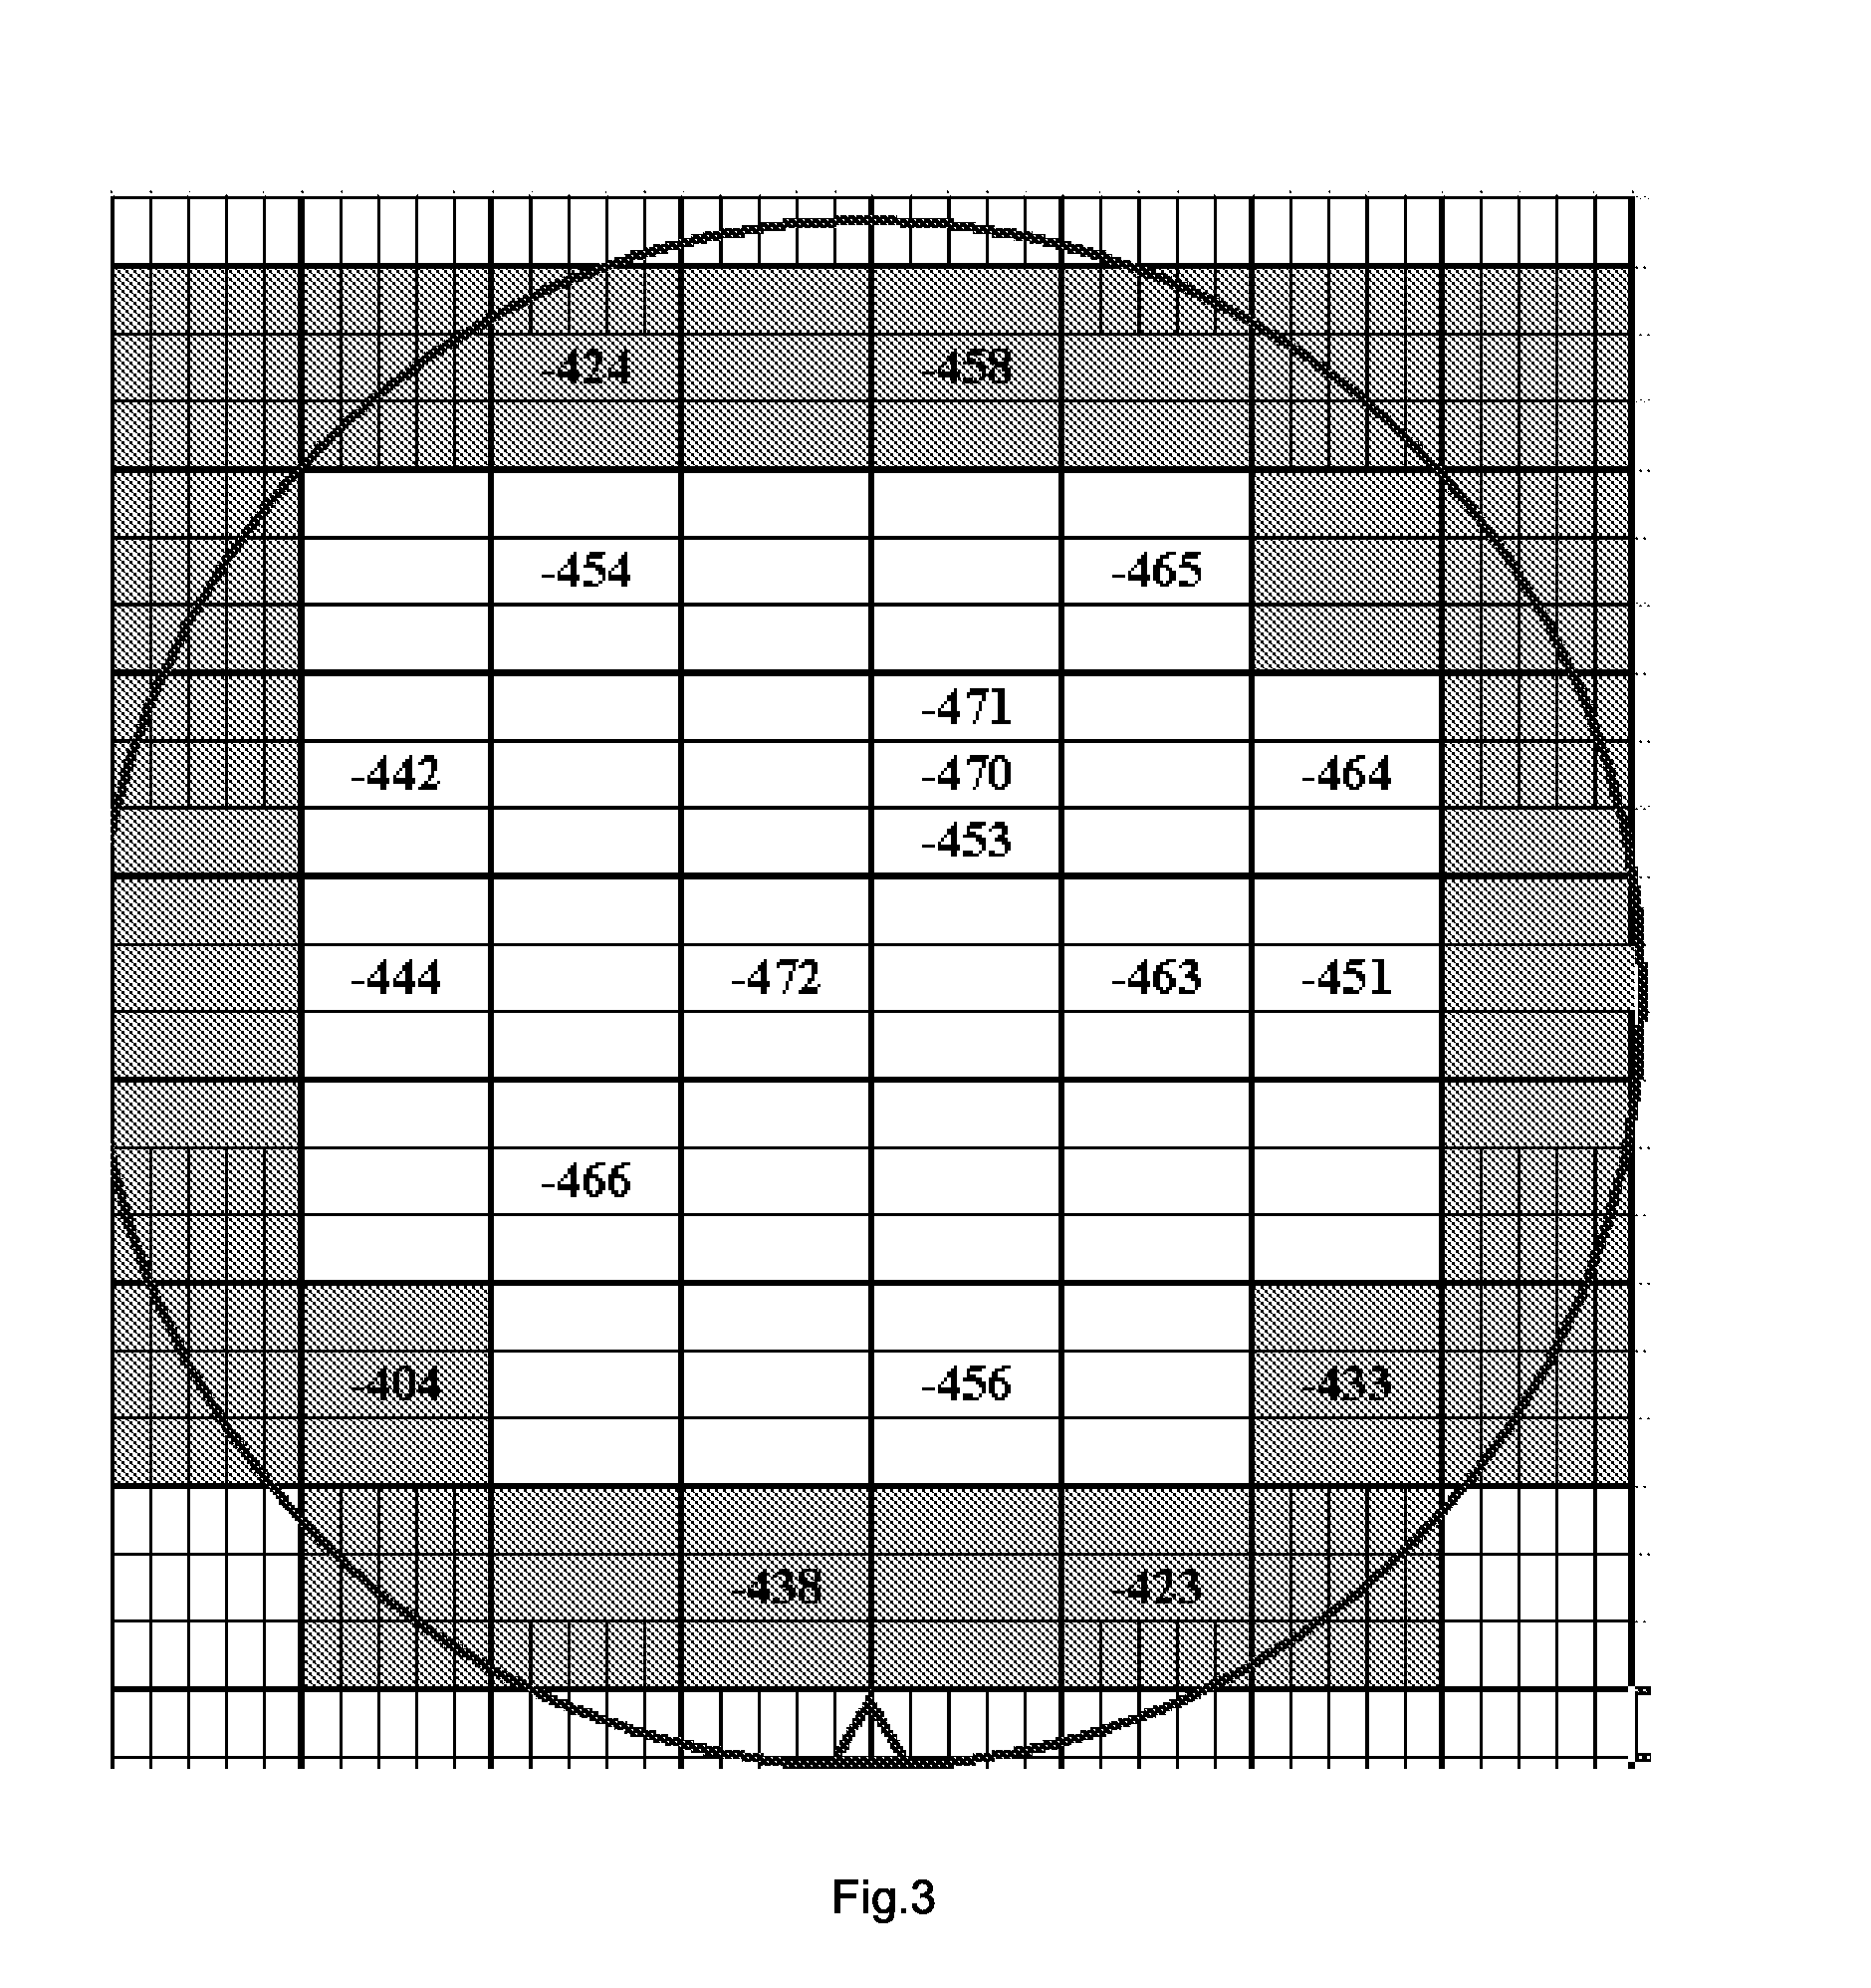 P-type mos transistor, method of forming the same and method of optimizing threshold voltage thereof